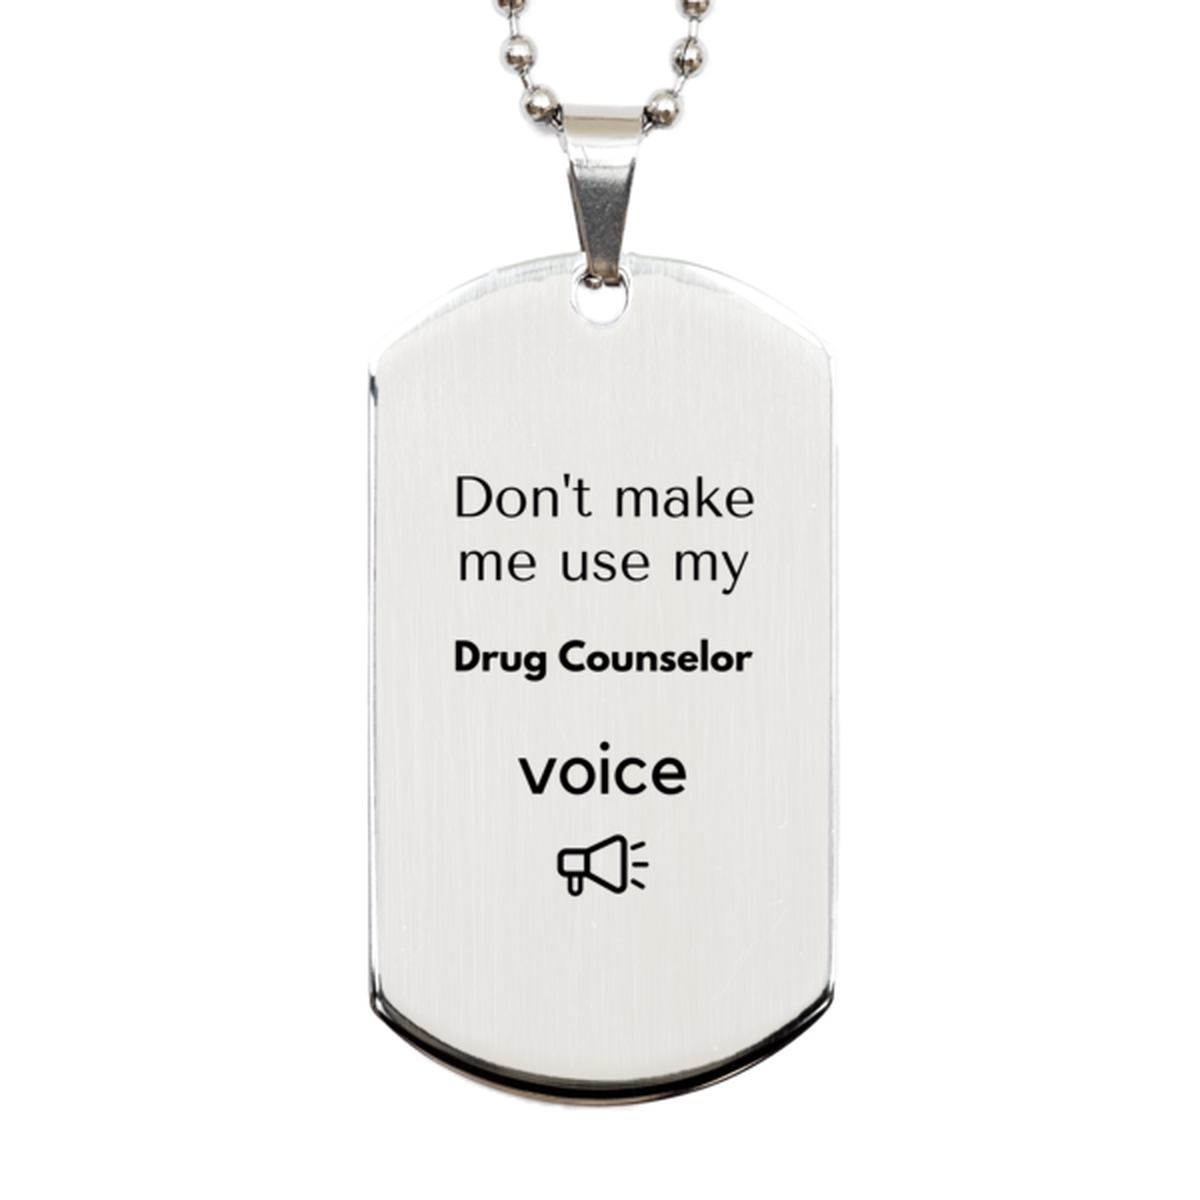 Don't make me use my Drug Counselor voice, Sarcasm Drug Counselor Gifts, Christmas Drug Counselor Silver Dog Tag Birthday Unique Gifts For Drug Counselor Coworkers, Men, Women, Colleague, Friends